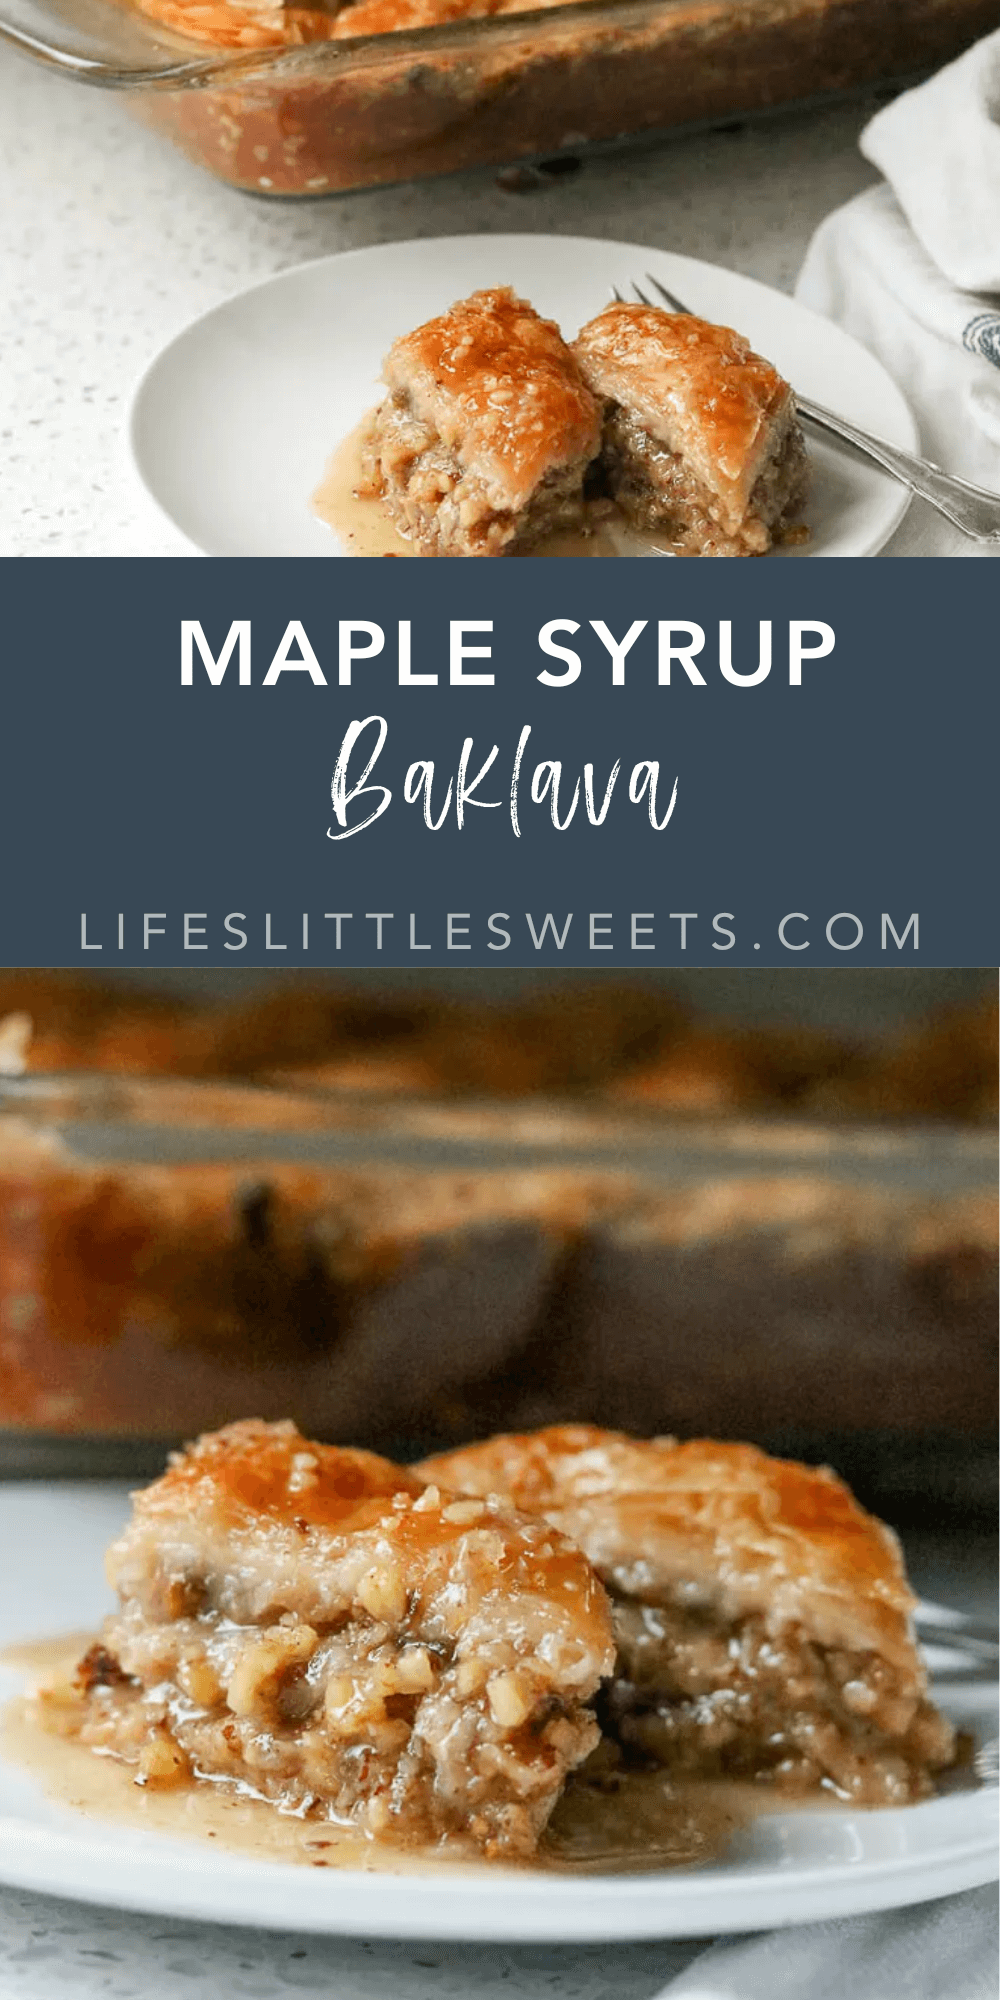 Maple Syrup Baklava with text overlay